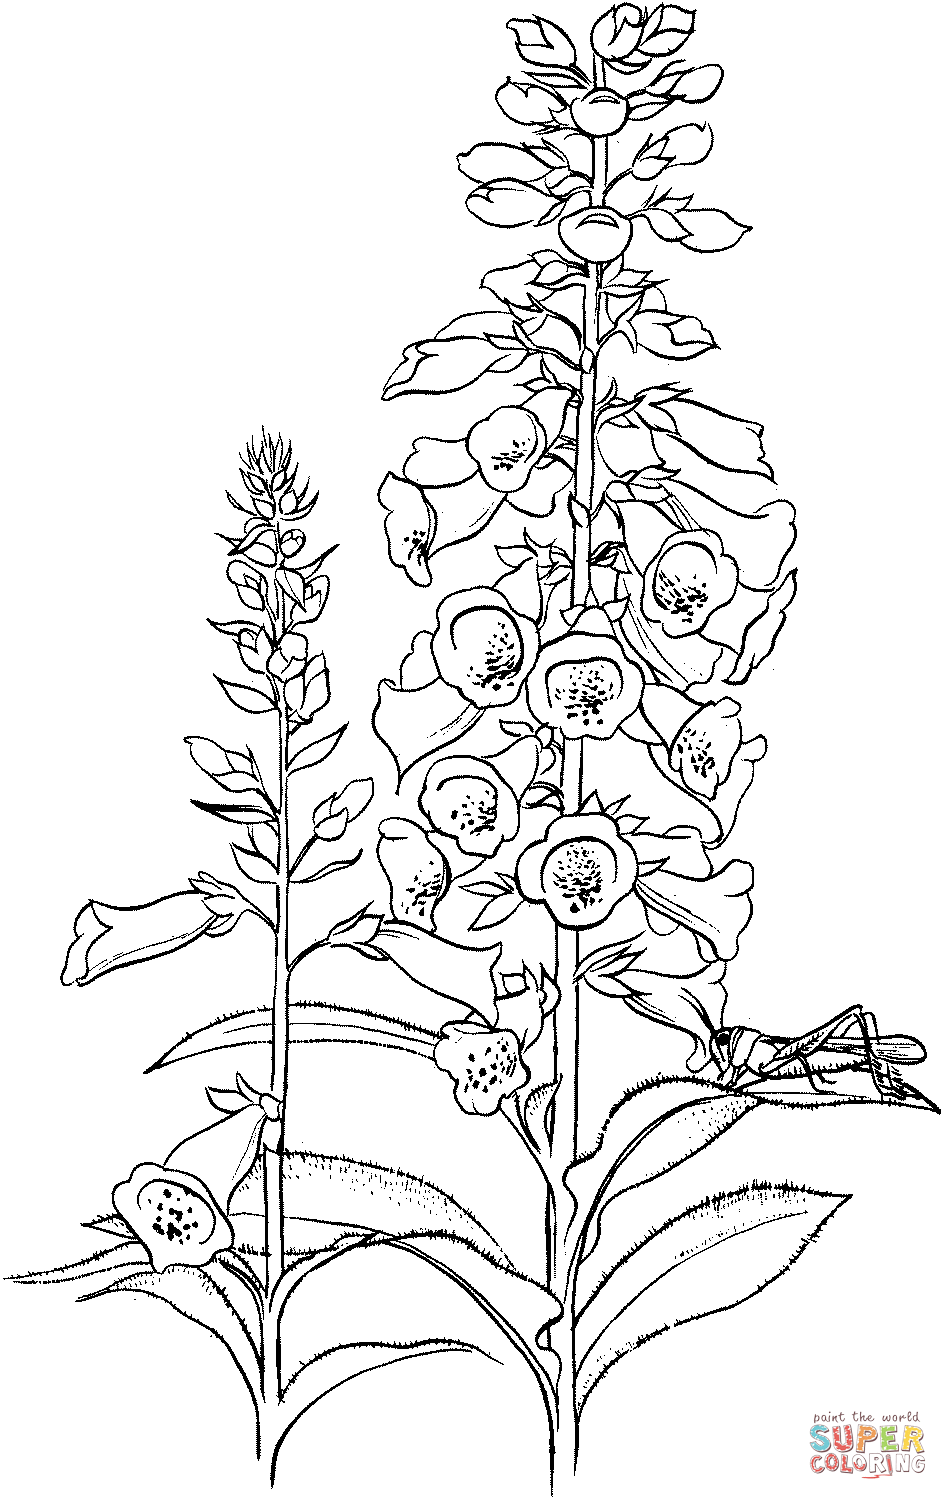 Grasshopper on the Flower coloring page | Free Printable Coloring Pages